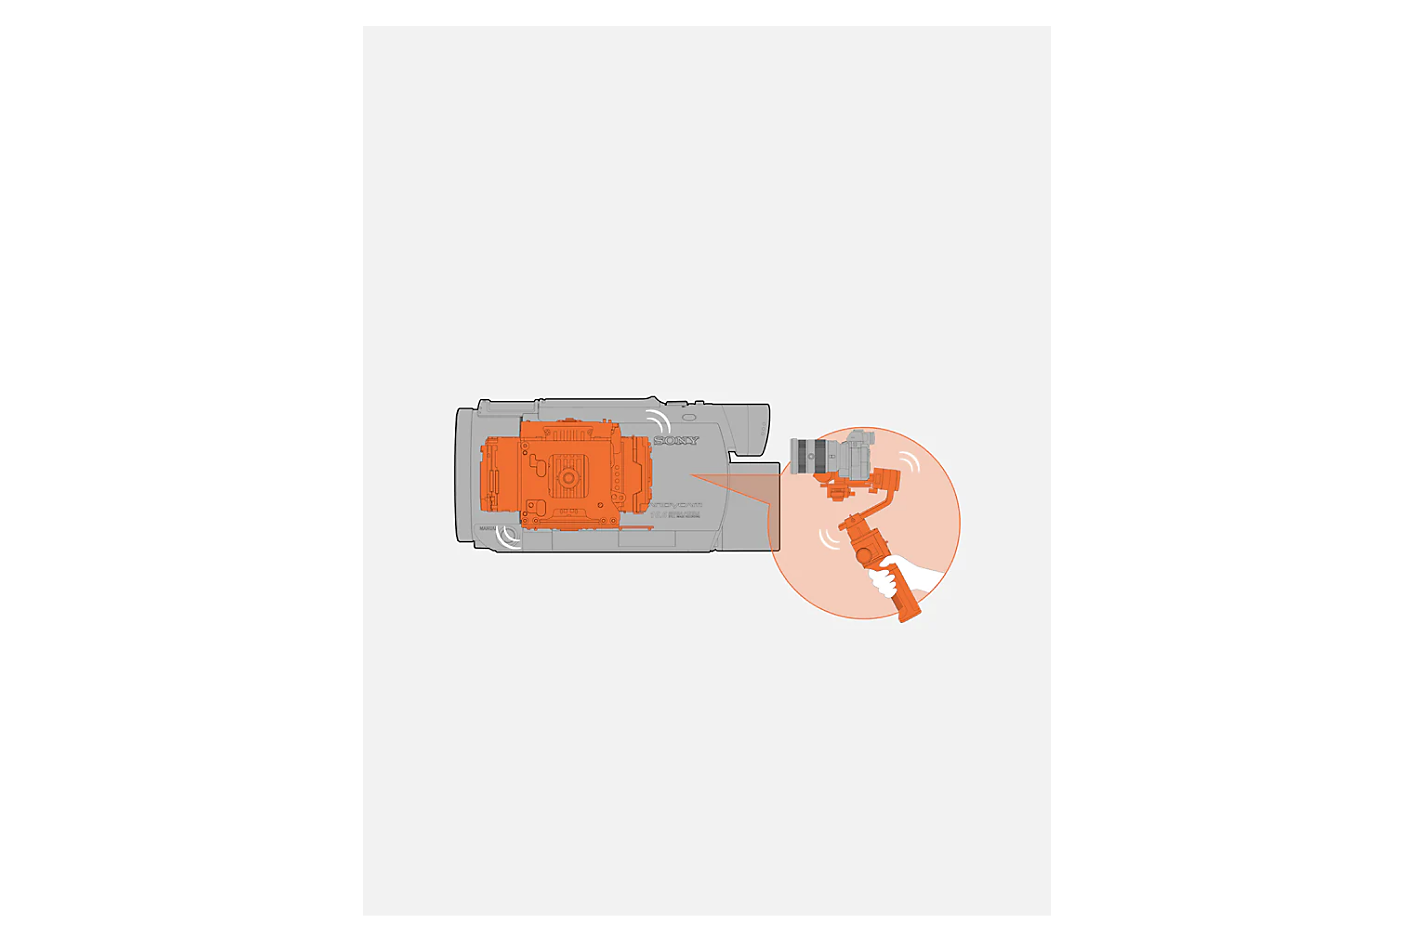 Graphic of grey camcorder with orange gimbal mechanism inside